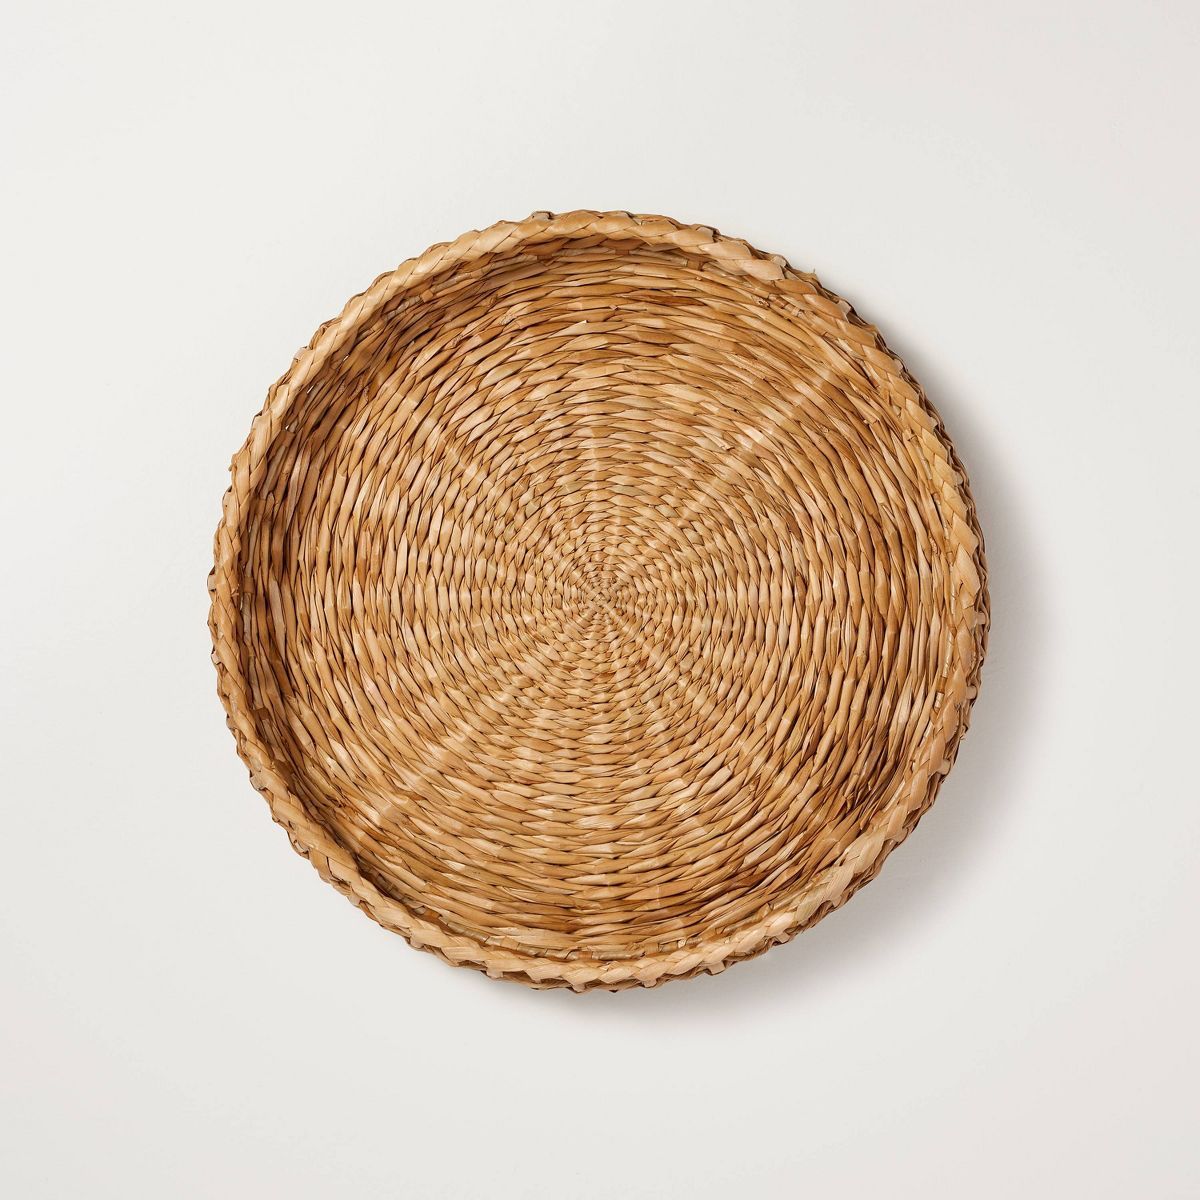 18" Natural Woven Decorative Tray - Hearth & Hand™ with Magnolia | Target